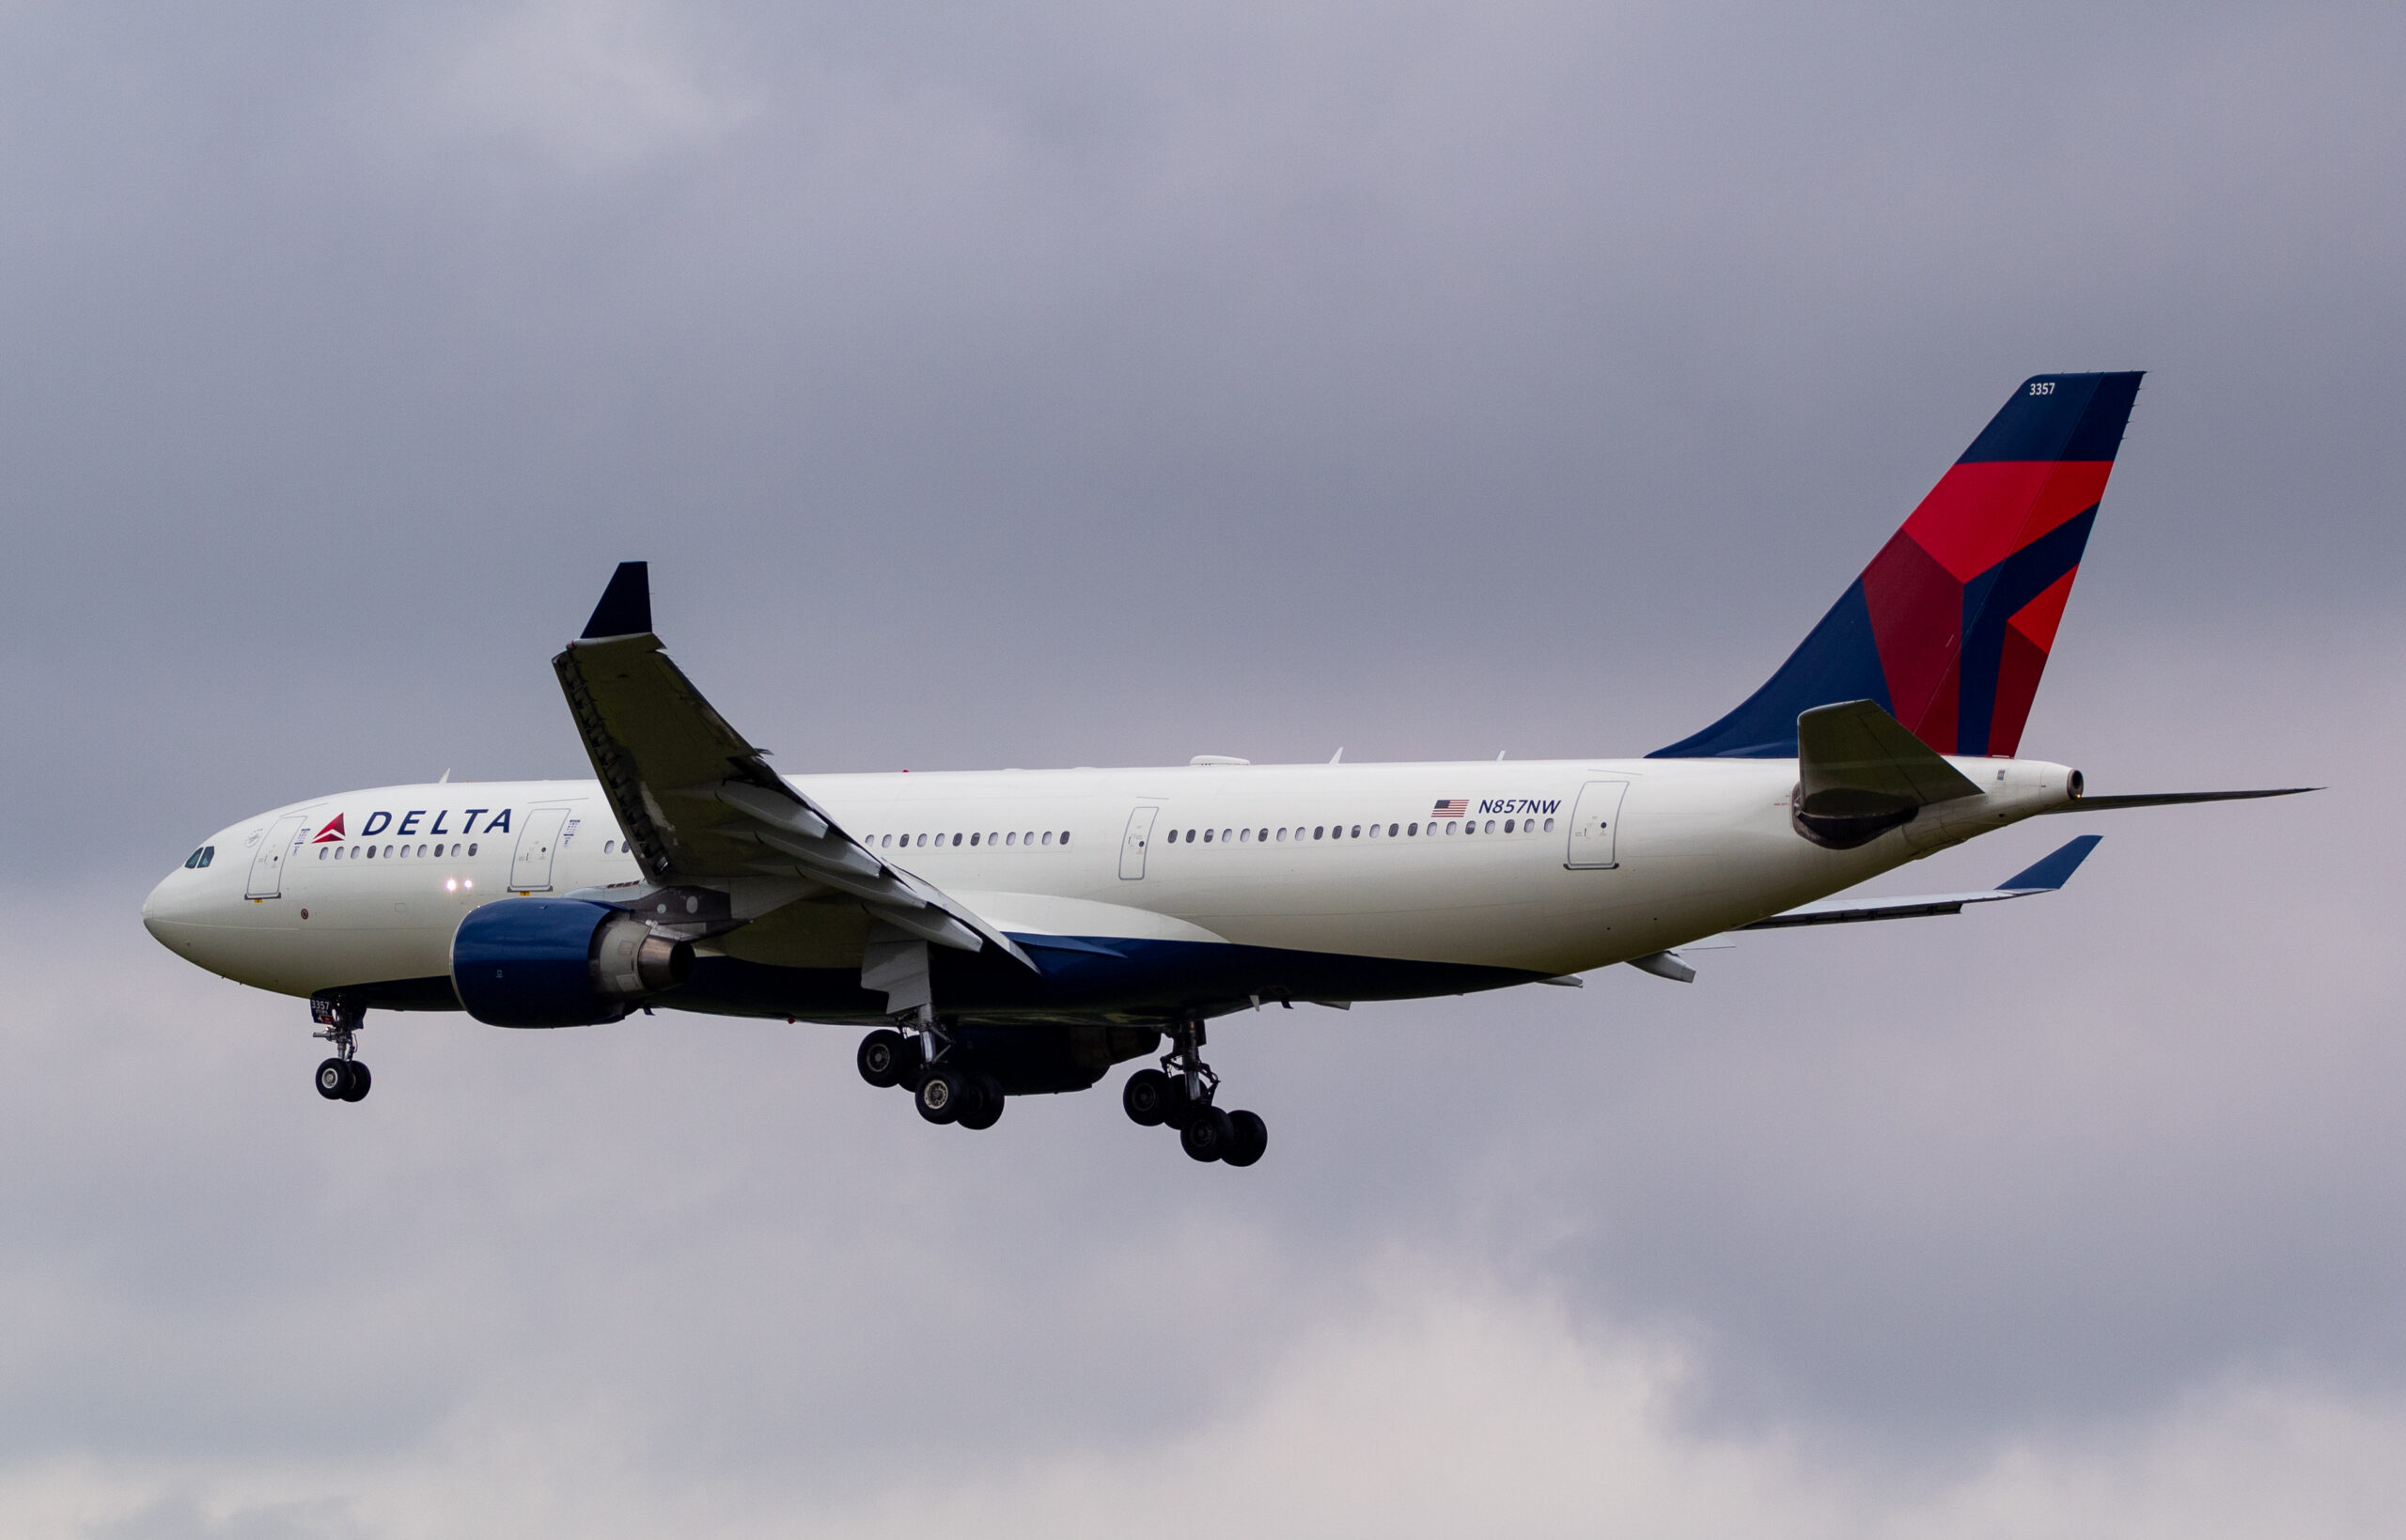 N857NW - Airbus A330-223 - Delta Air Lines - Blog do Spotter